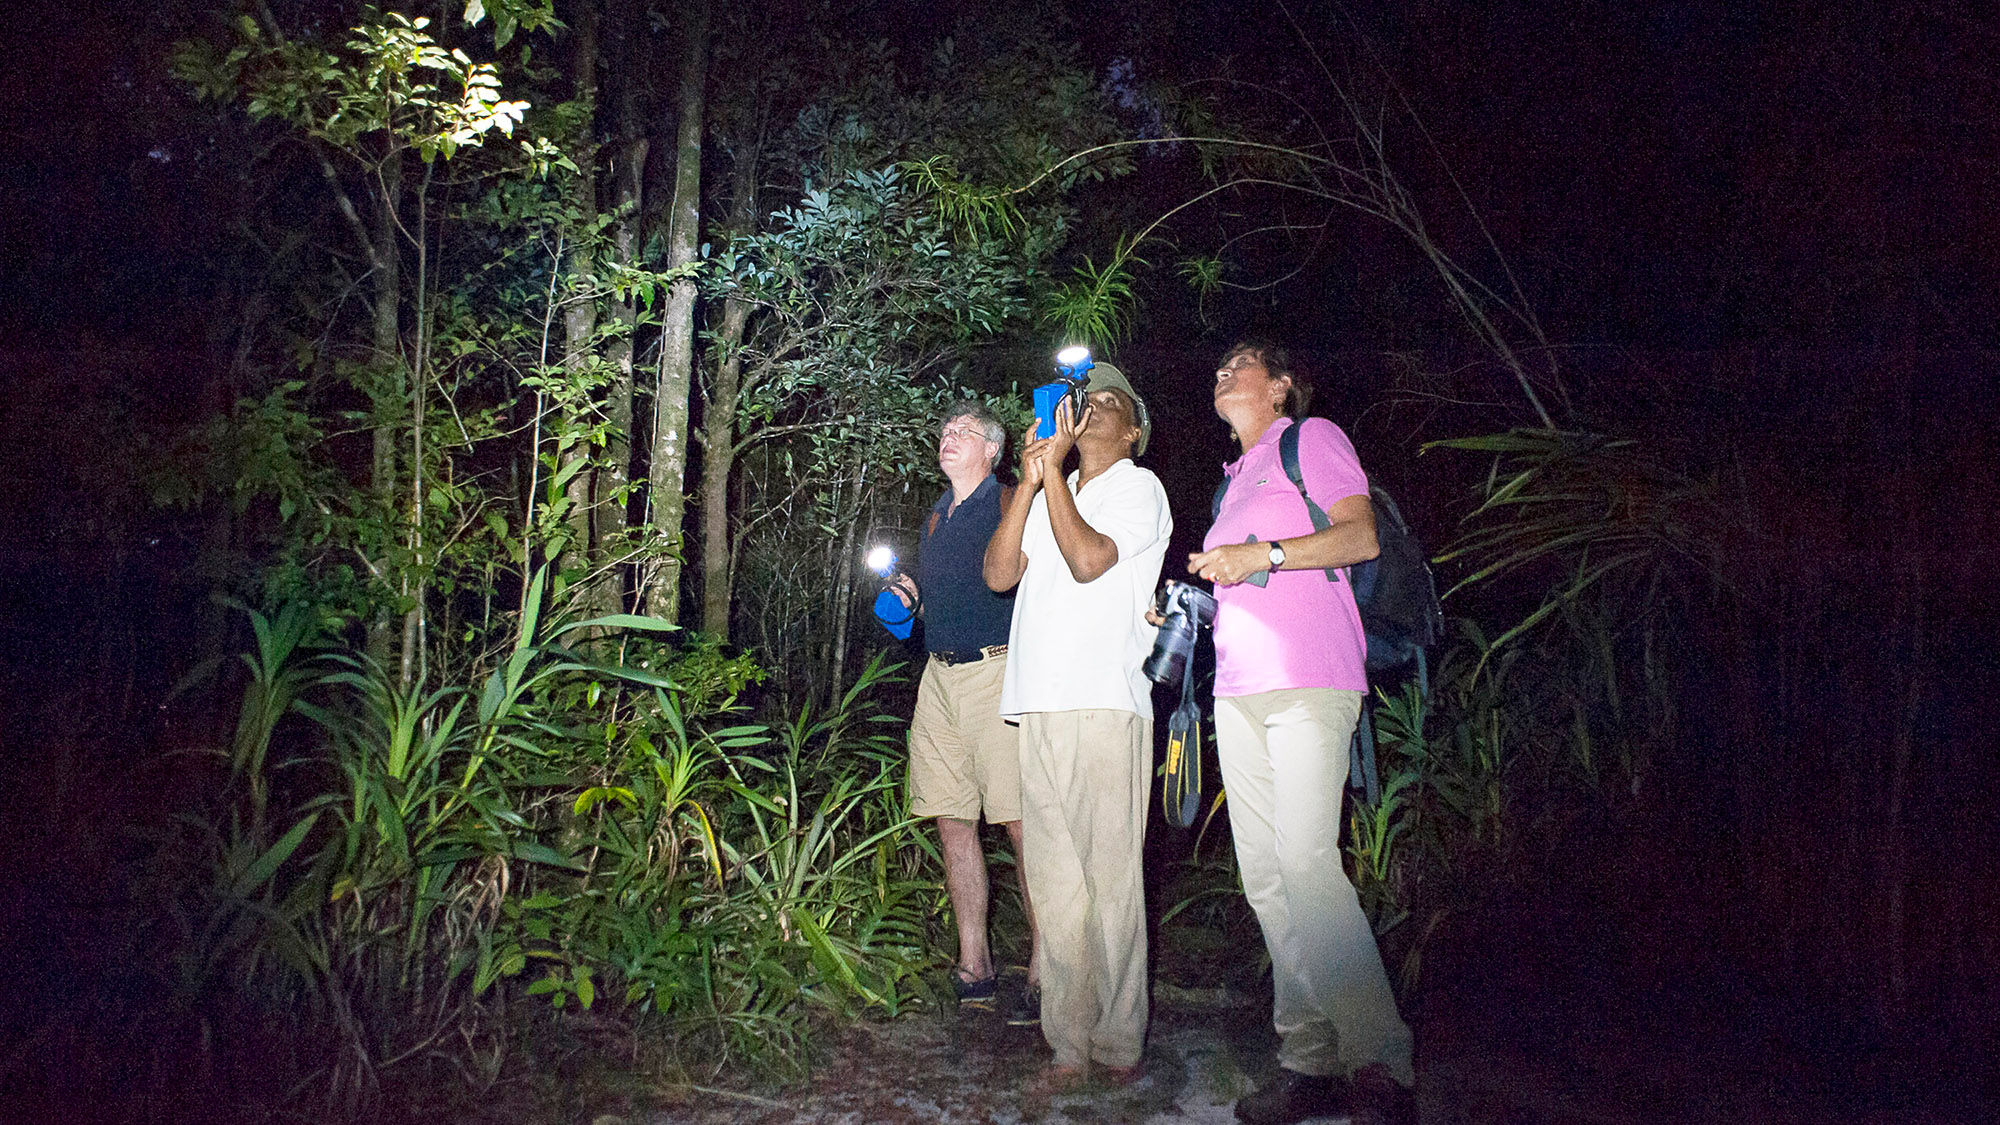 A night walk, usually banned in Madagascar's national parks, is one of the perks of staying at the Masoala Forest Lodge.